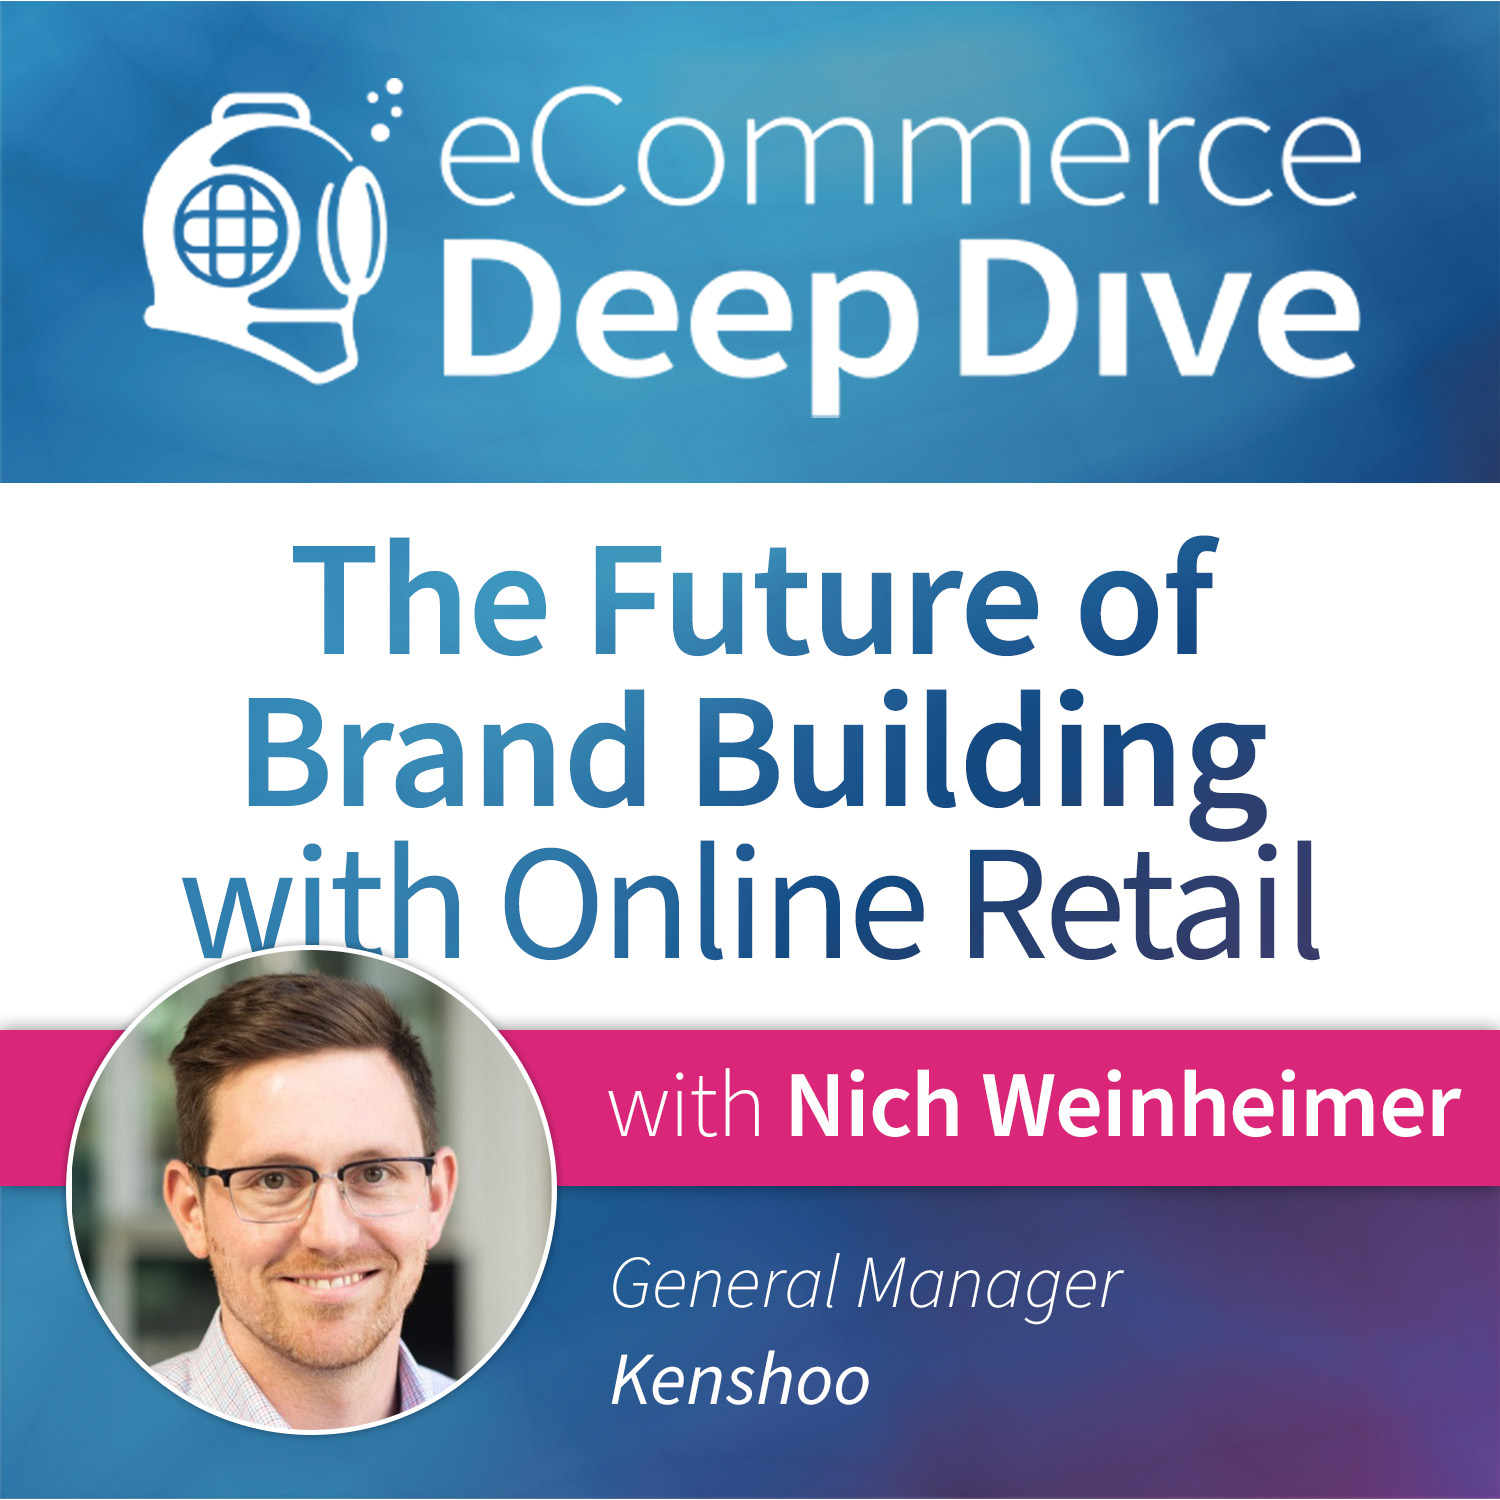 Nick Weinheimer: The Future of Brand Building with Online Retail